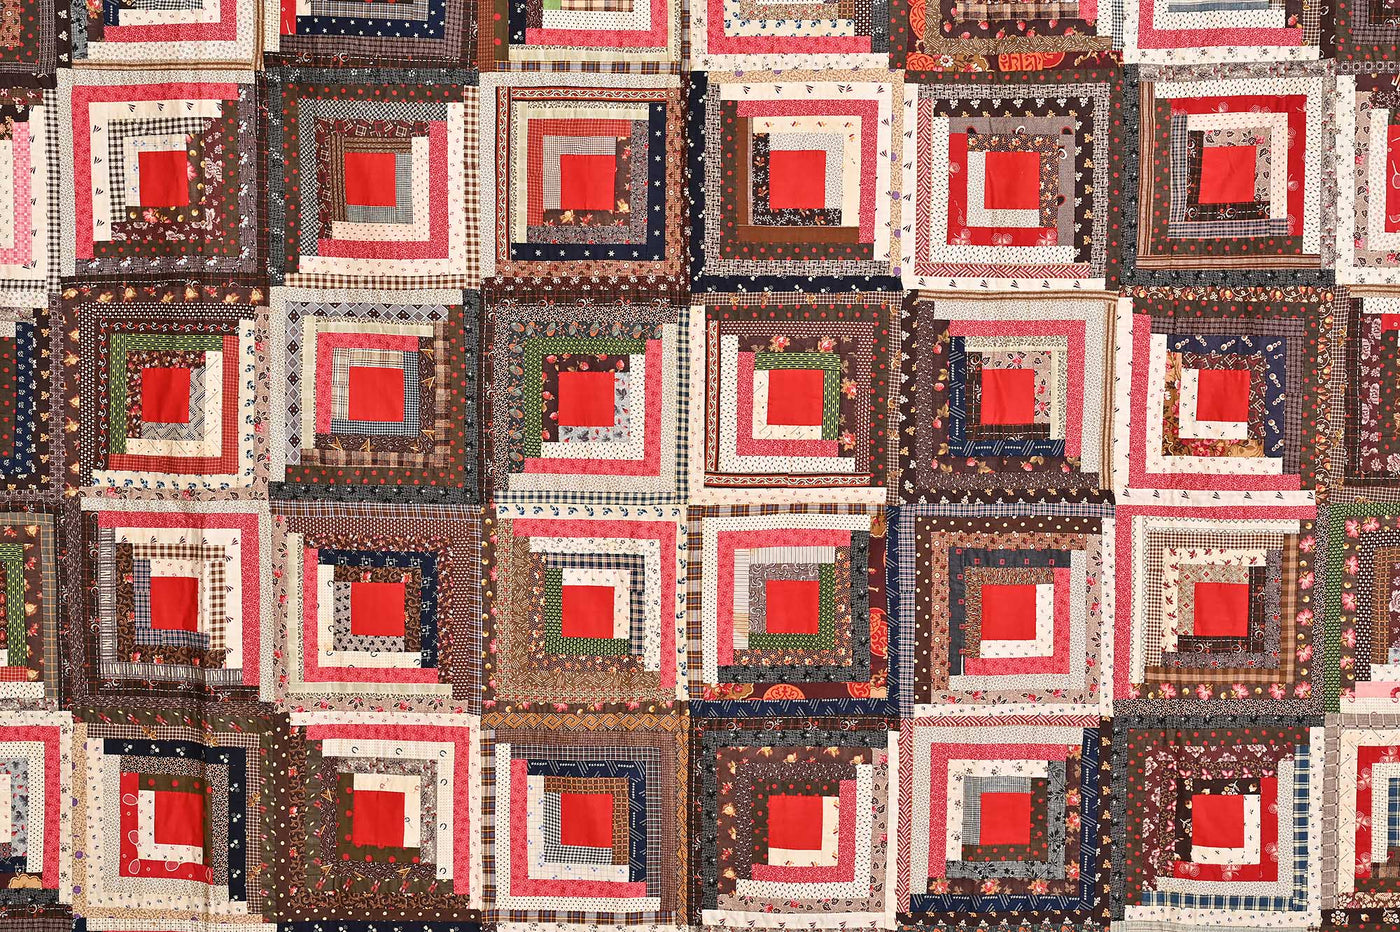 Close up of diamond and square patterns on 19th century Barn-raising Log Cabin Quilt.